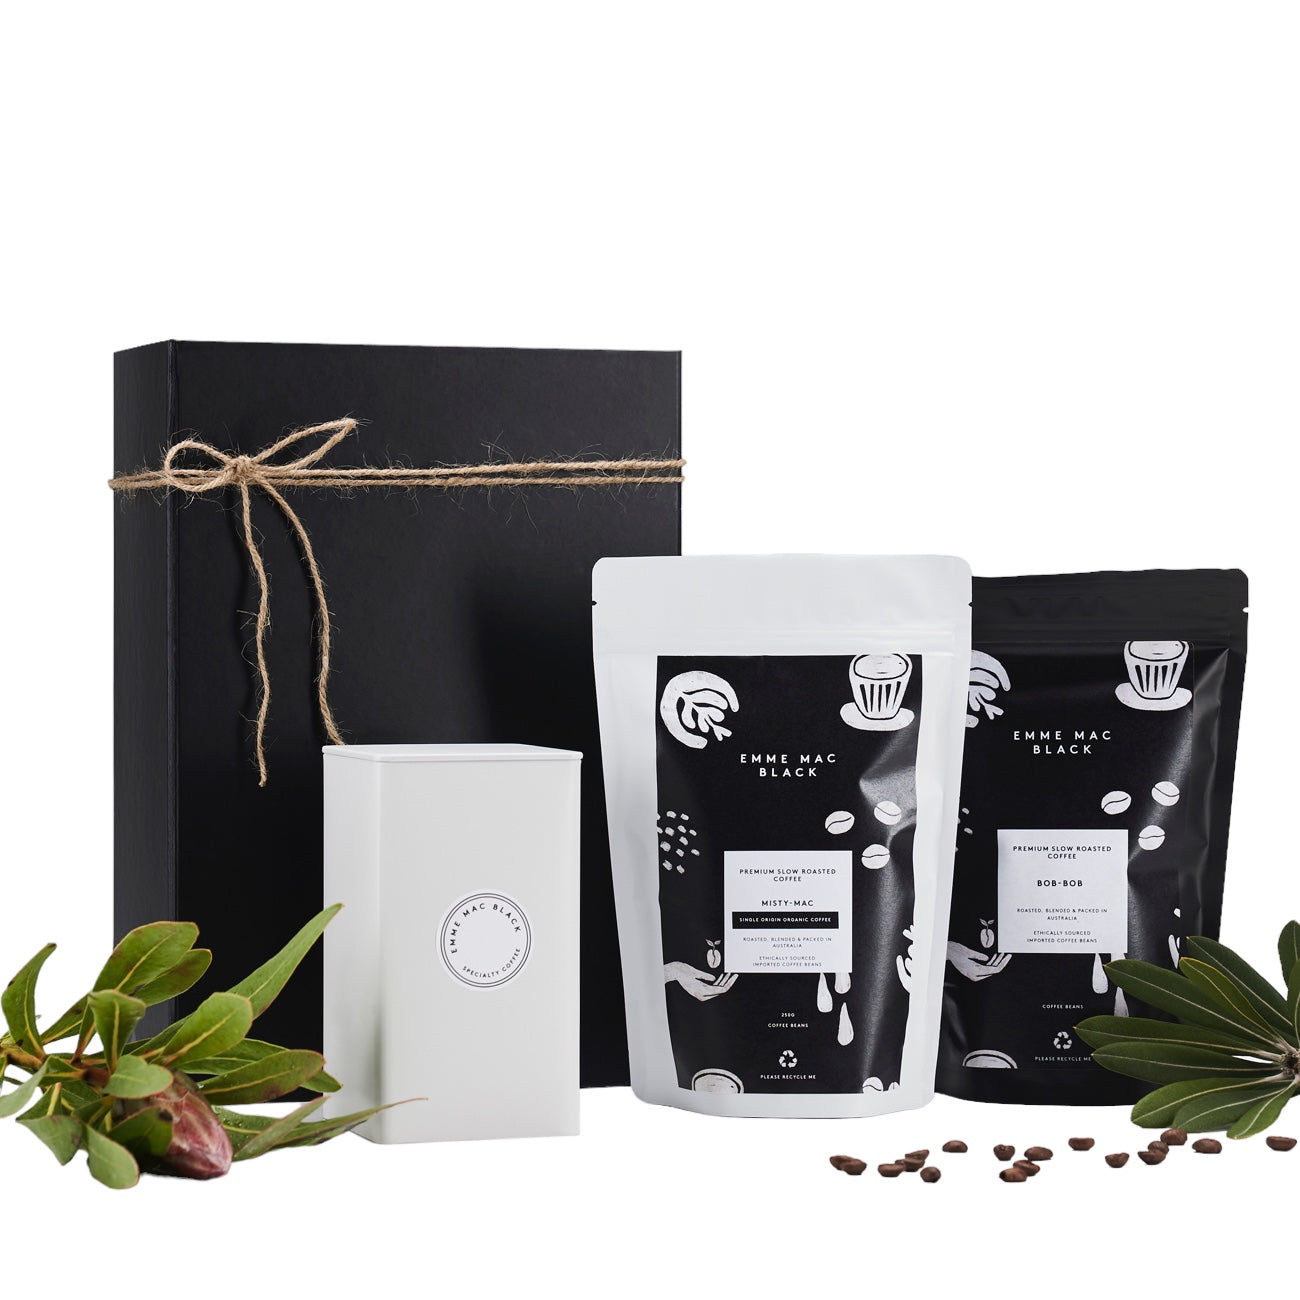 Double the Love Gift Box - Emme Mac Black 